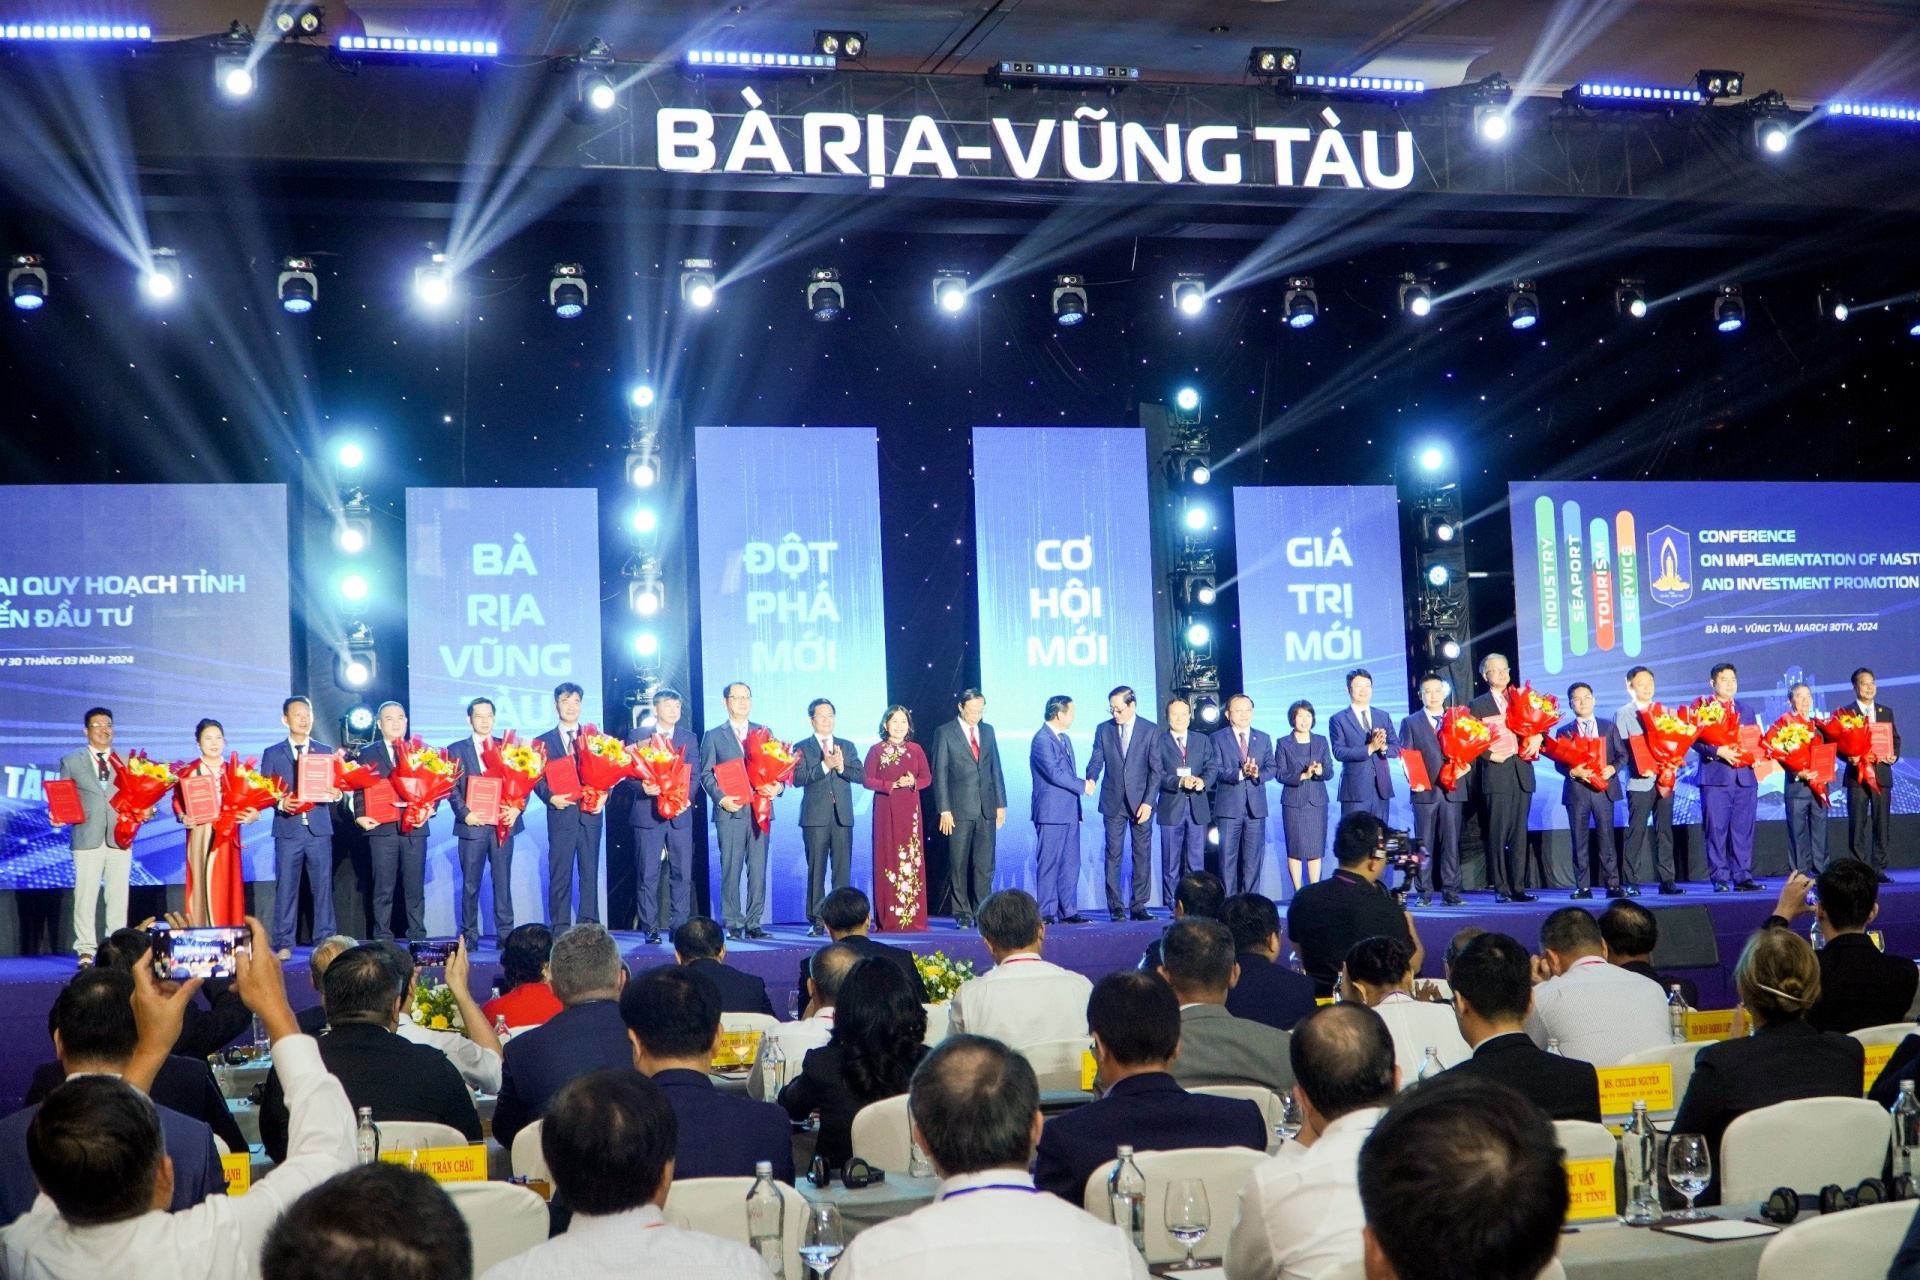 ba ria vung tau hosts conference to introduce provincial plan